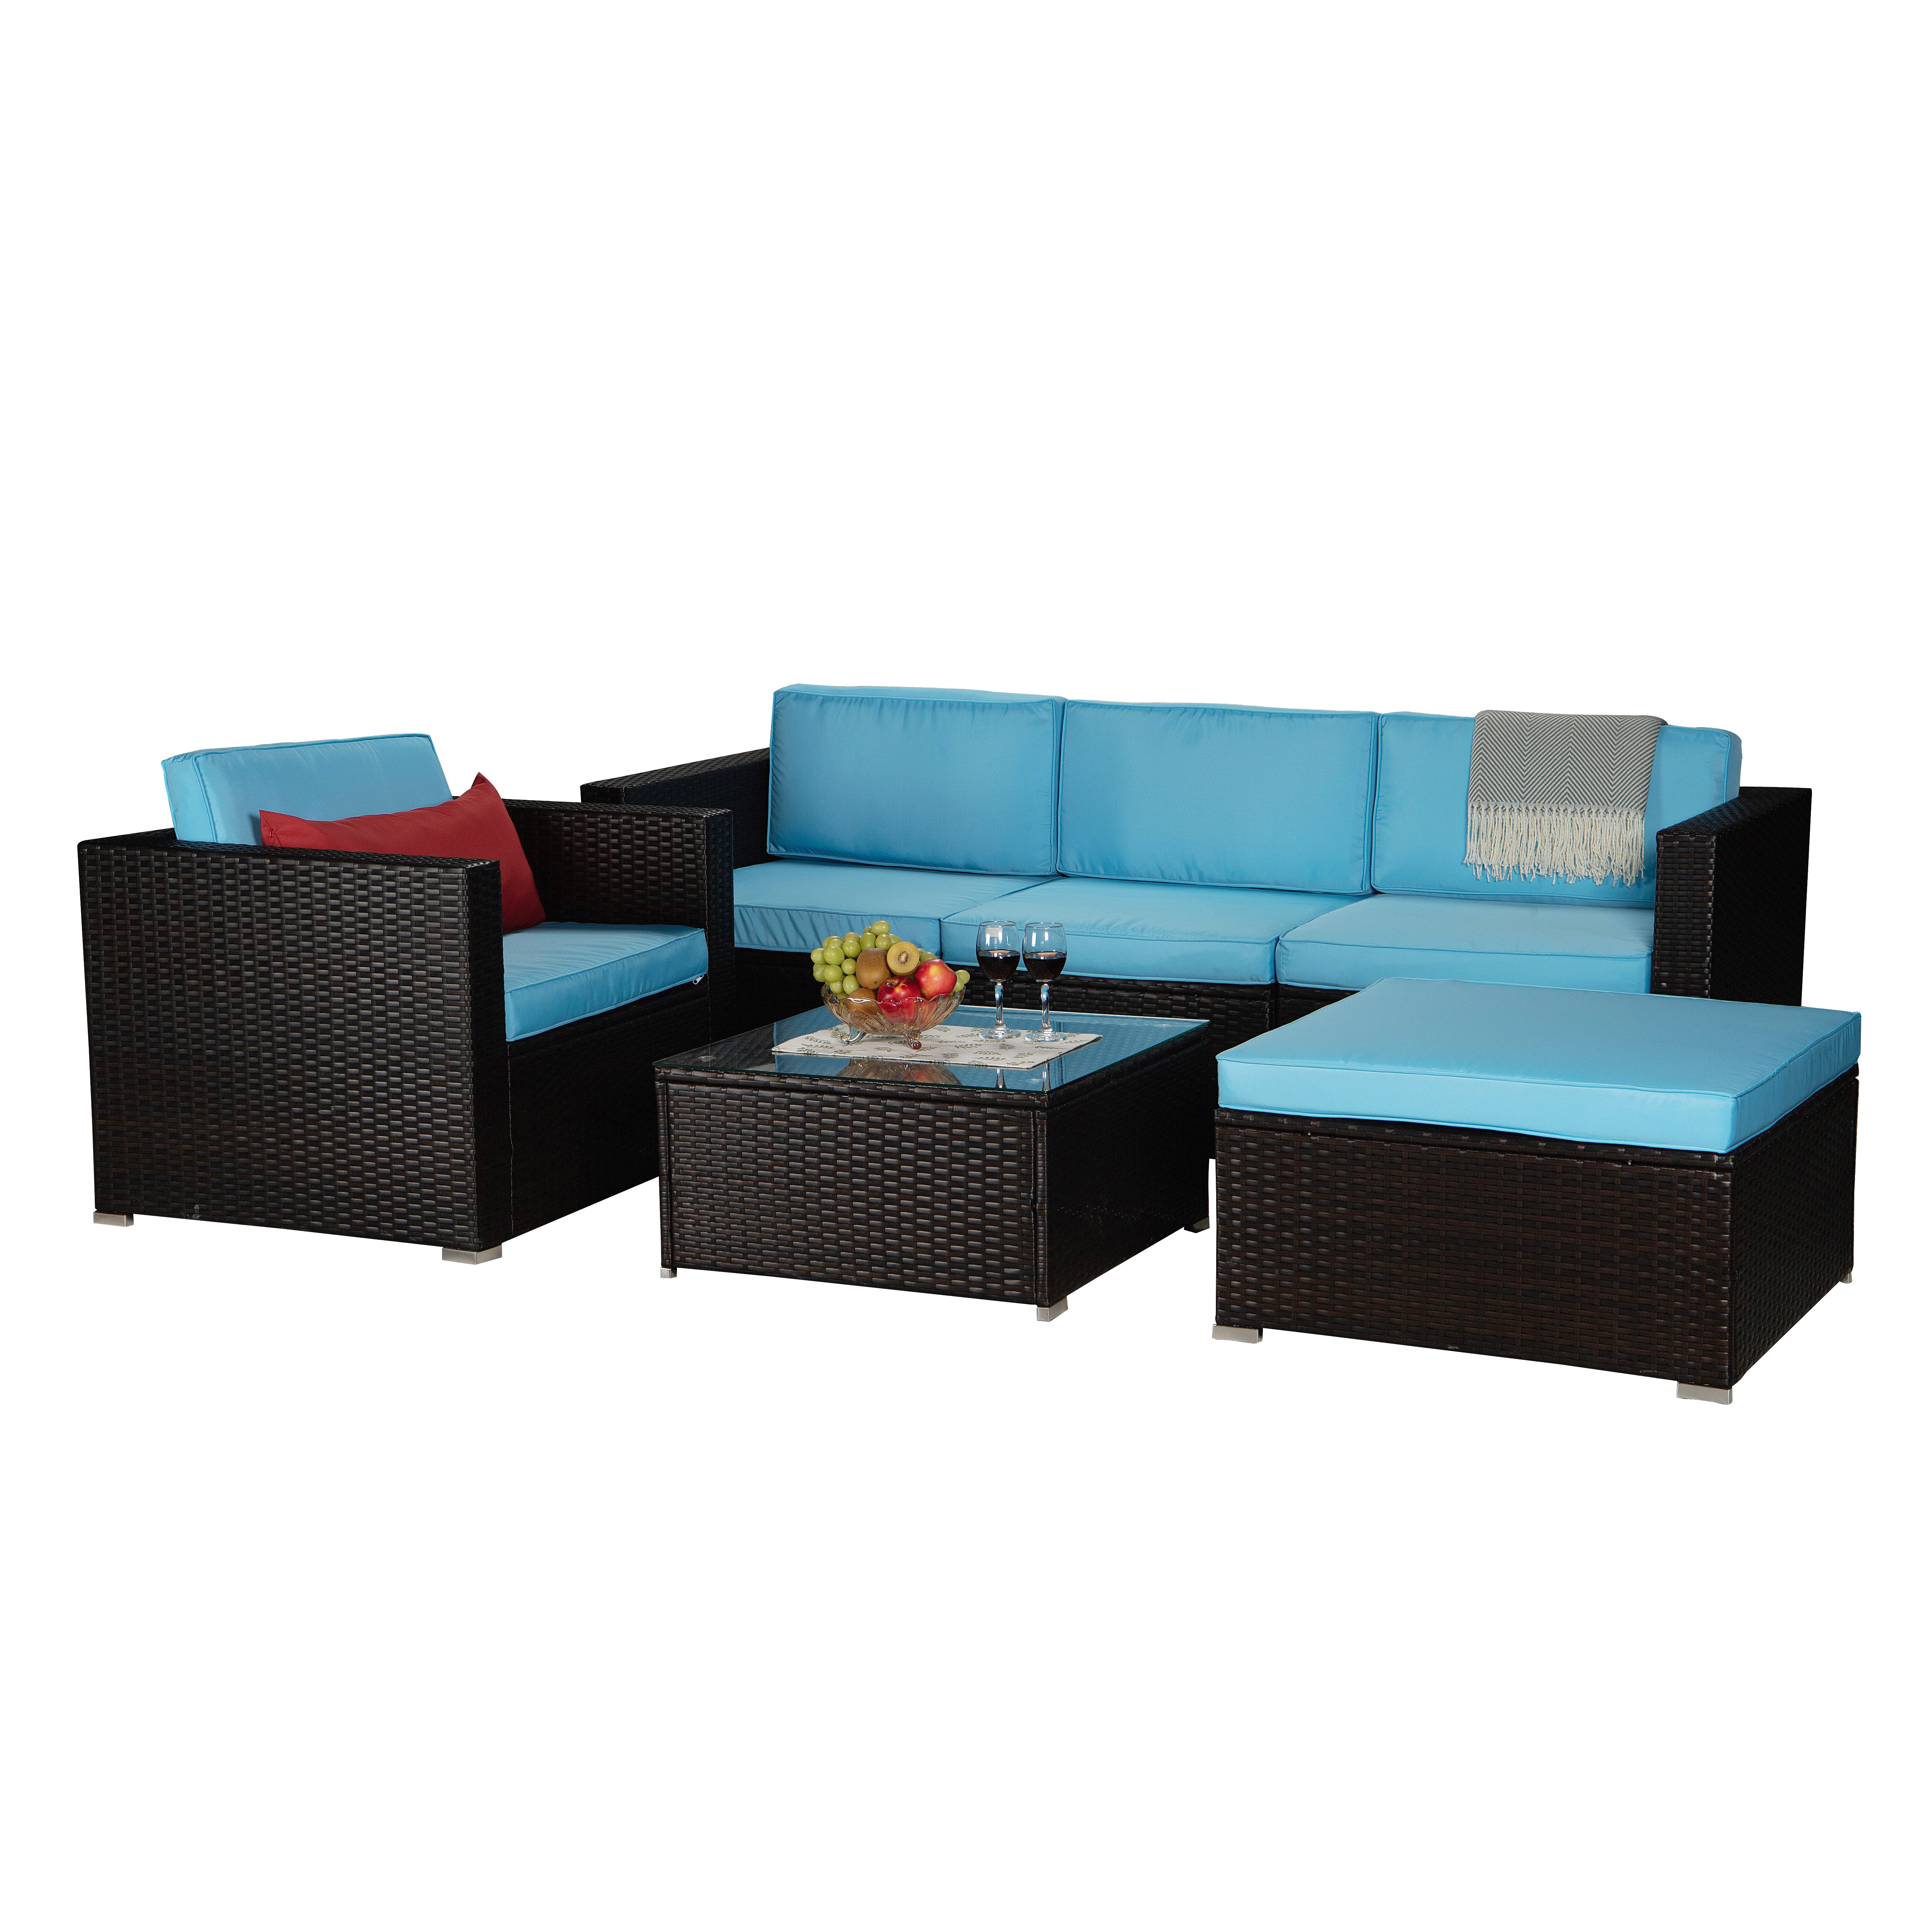 6-Piece Outdoor Patio Furniture Set PE Rattan Wicker Sectional Sofa Set with Coffee Table, Blue Cushioned and Red Pillow - image 3 of 8